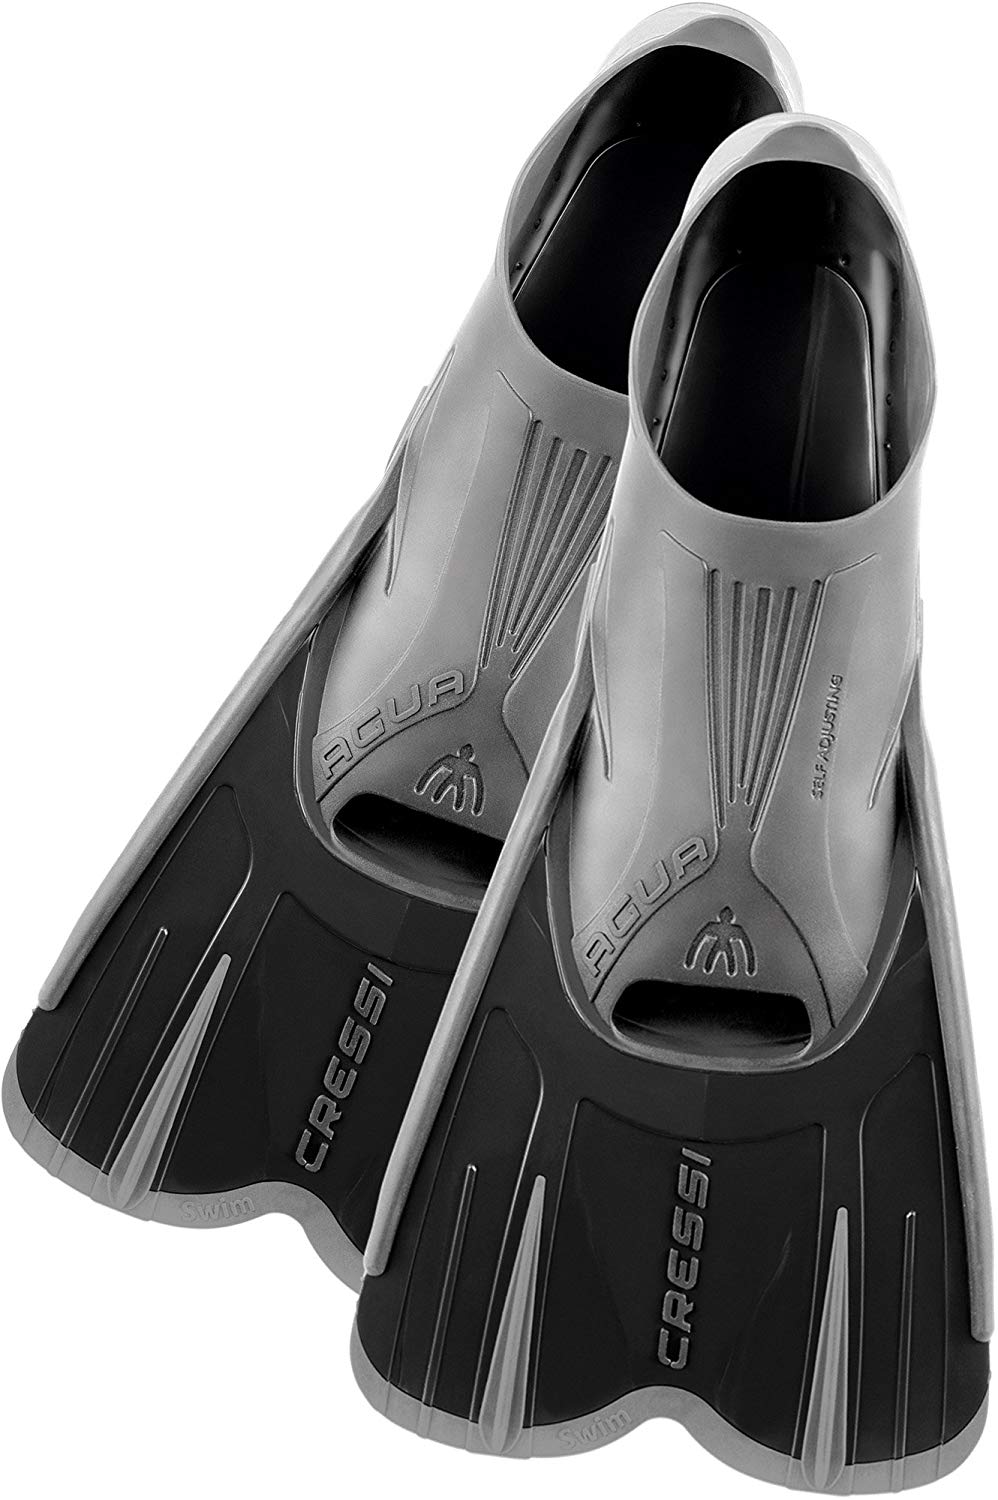 Top 10 Best Swim Fins for Lap Swimming in 2018 Review